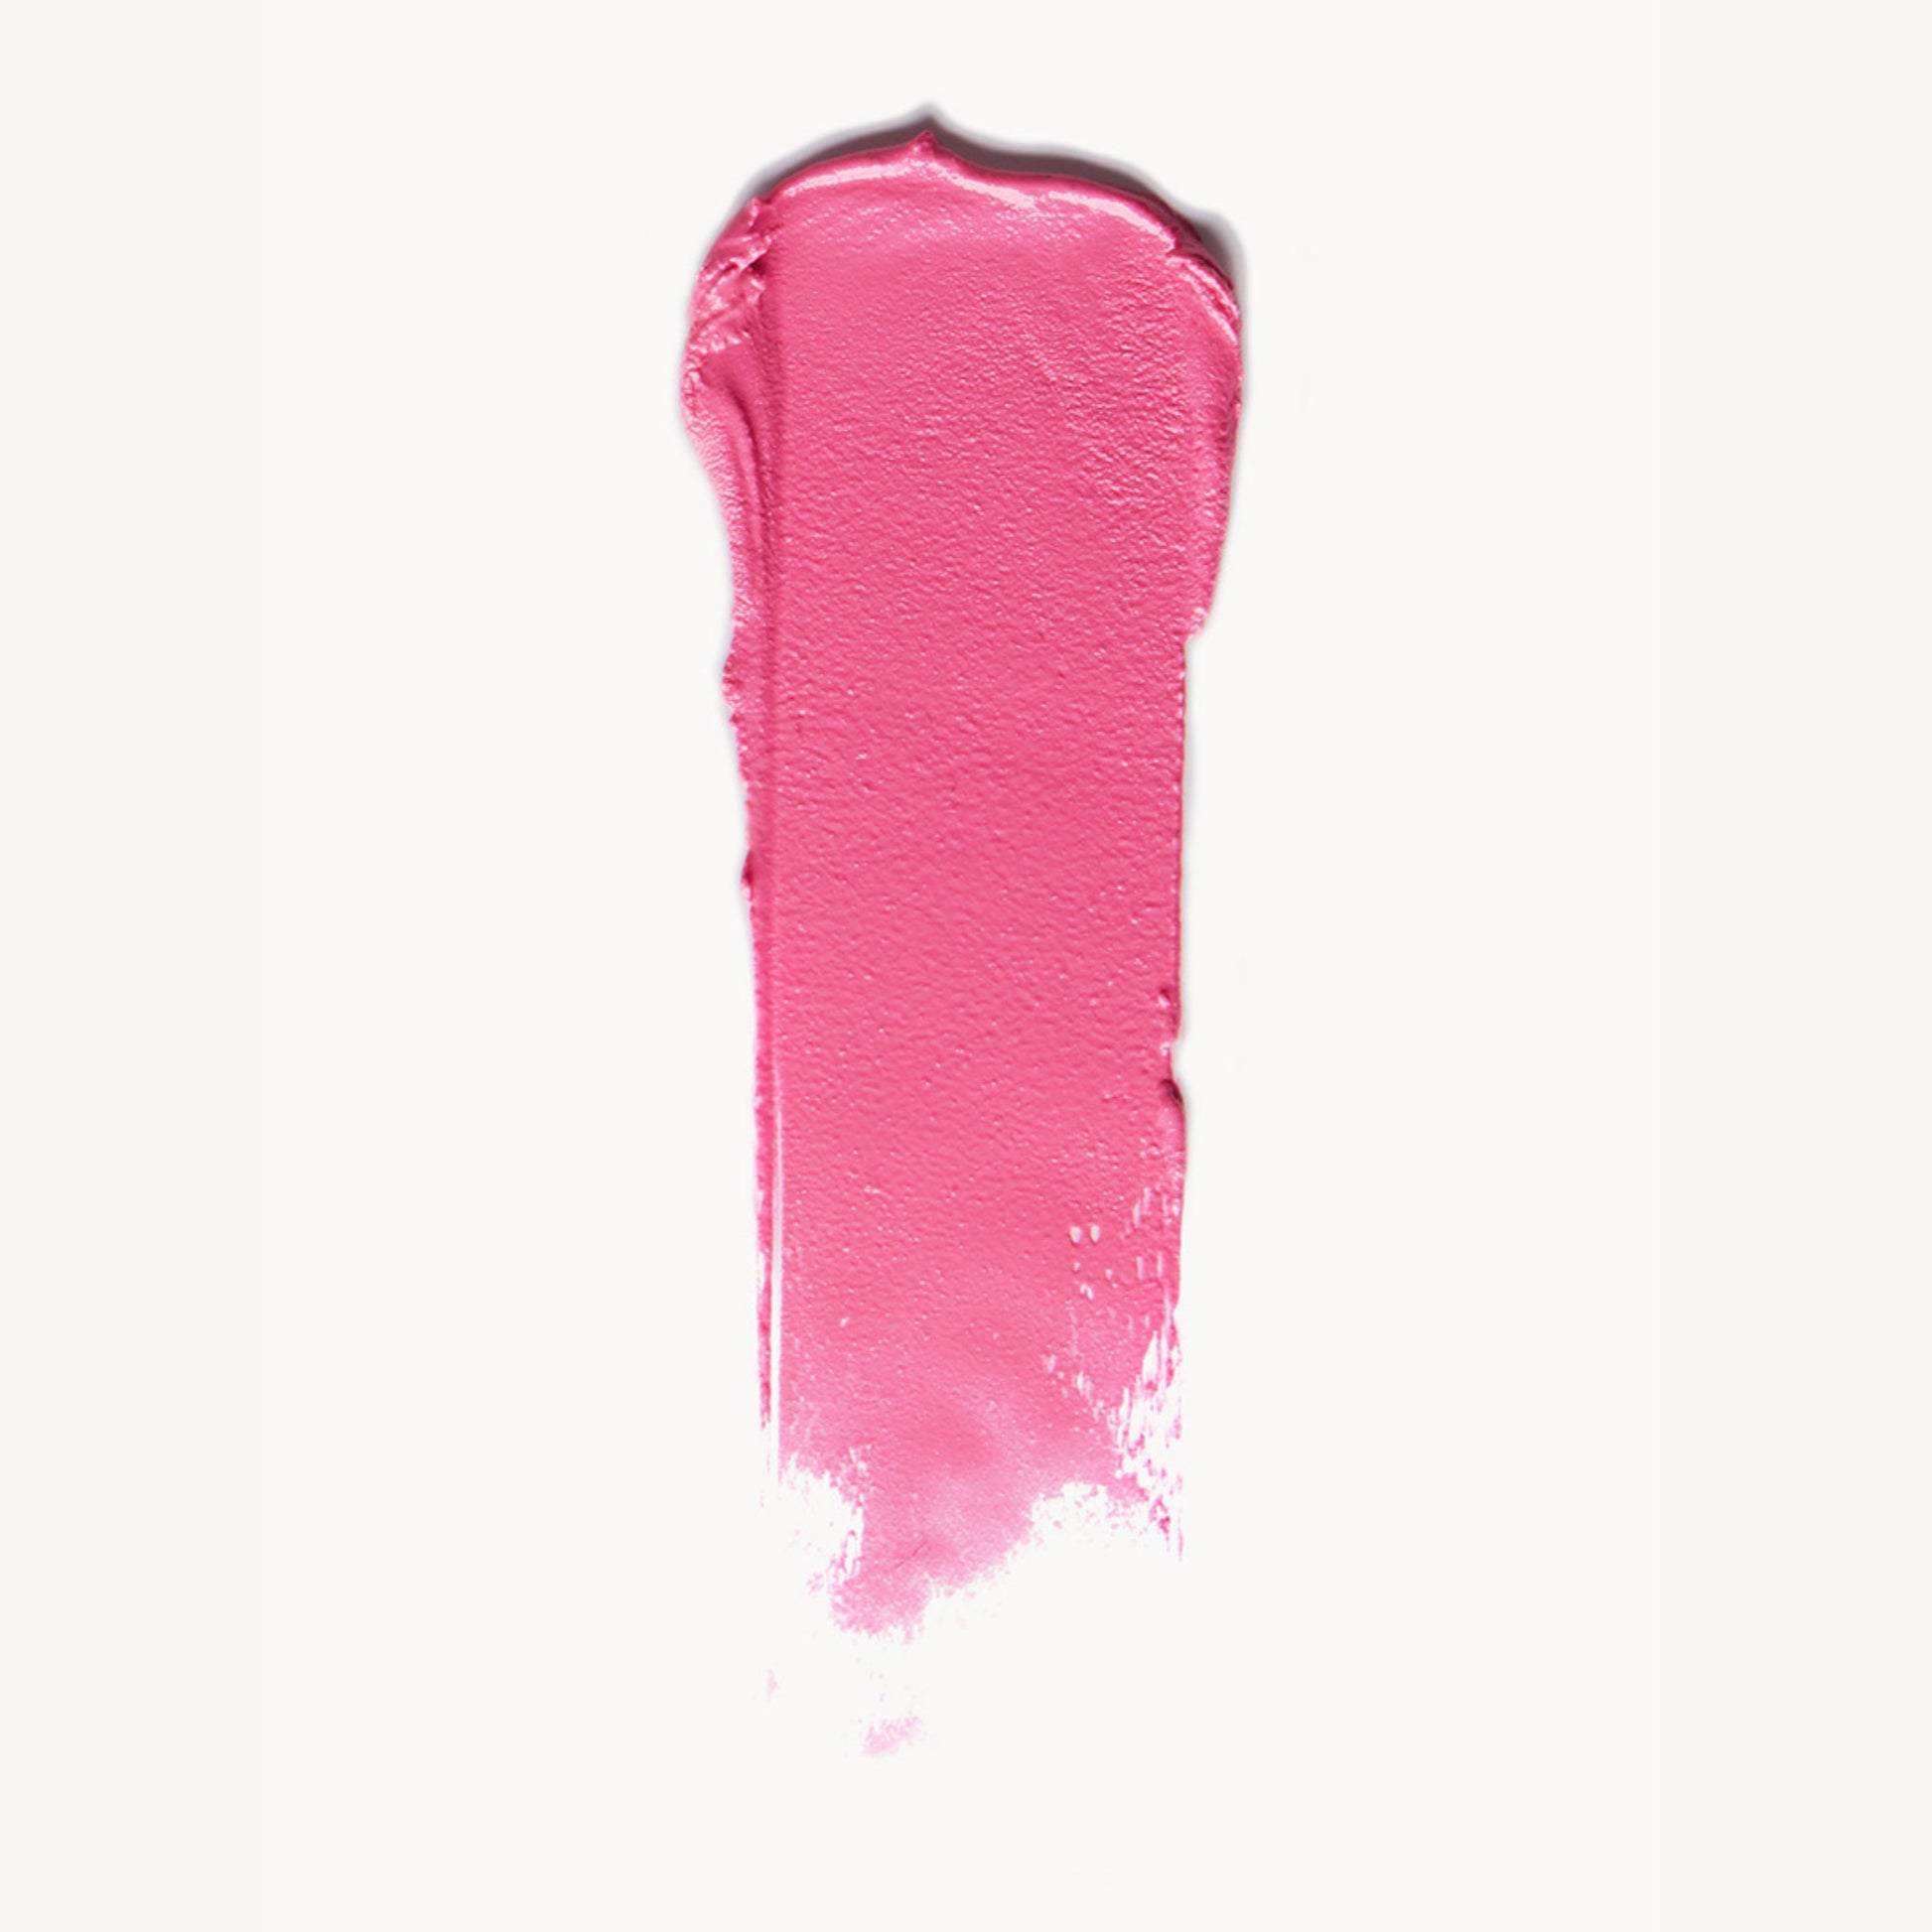 A wipe of vibrant pink cream blush on a white background